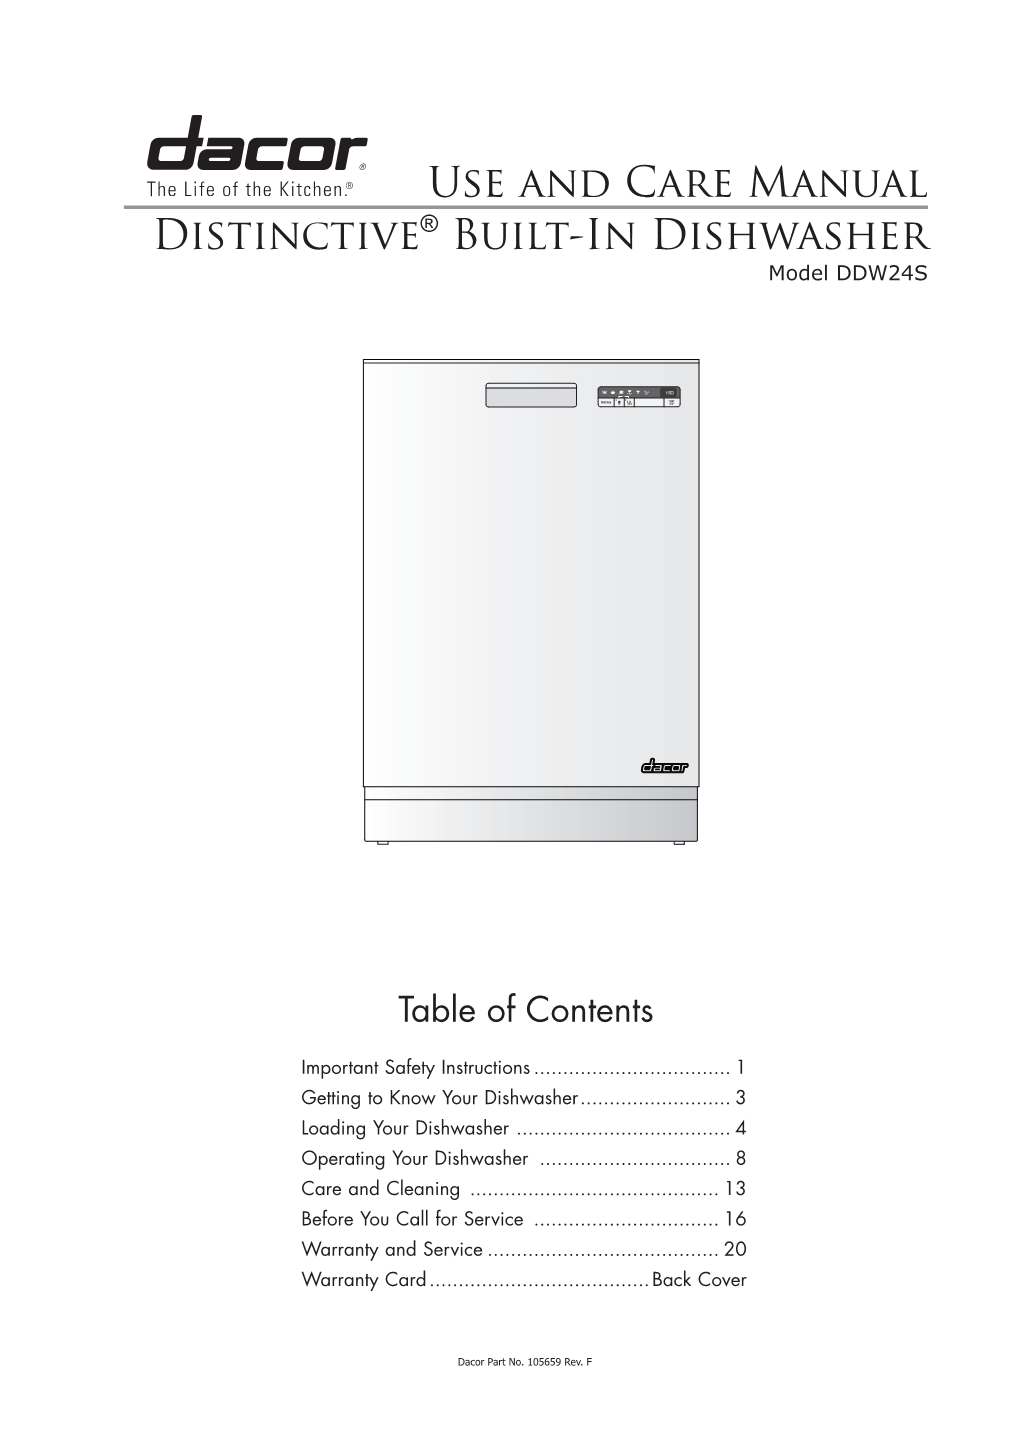 Use and Care Manual Distinctive® Built-In Dishwasher Model DDW24S